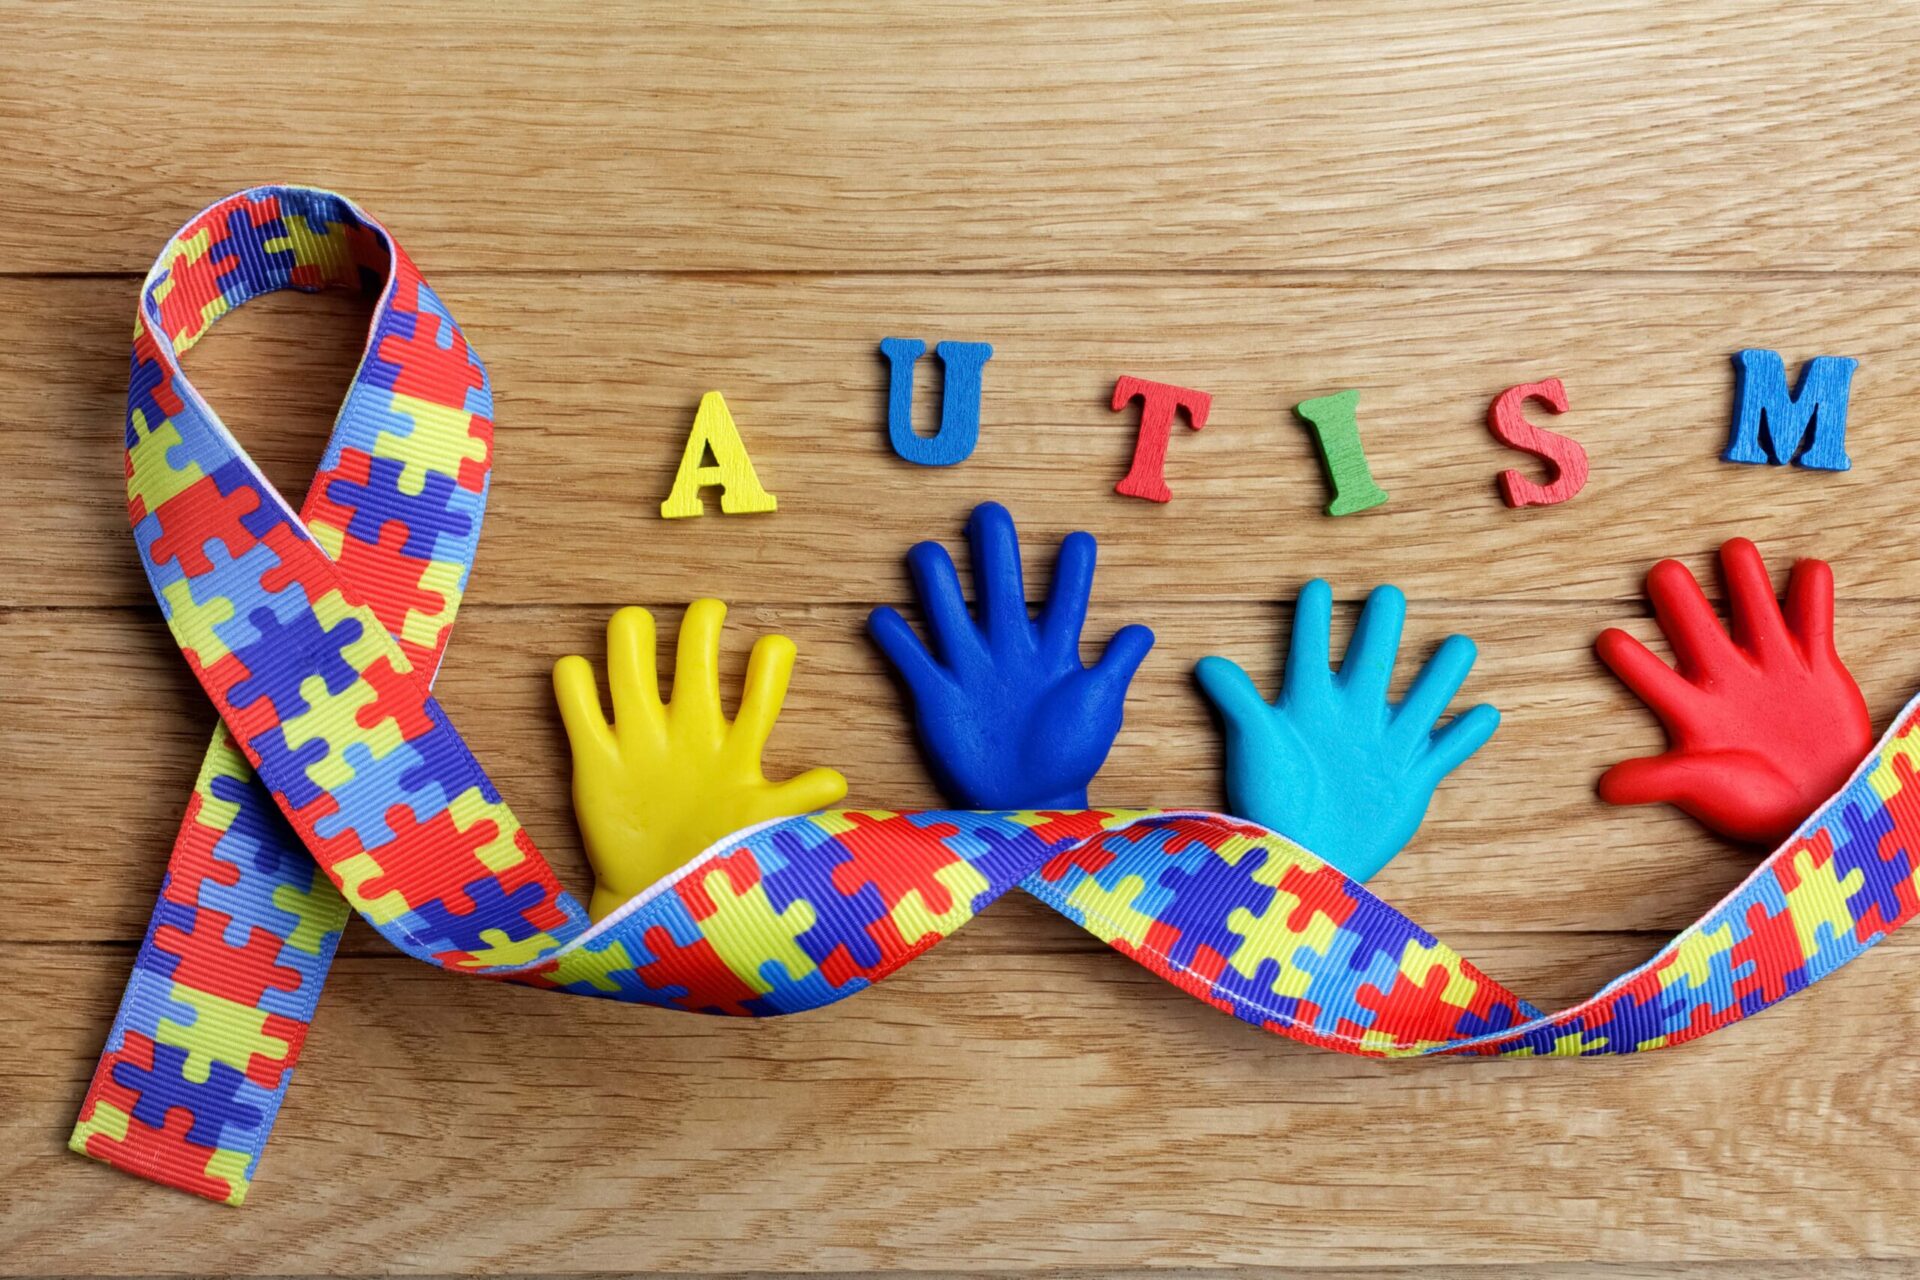 Autism,Awareness,Concept,With,Colorful,Hands,On,Wooden,Background.,Top